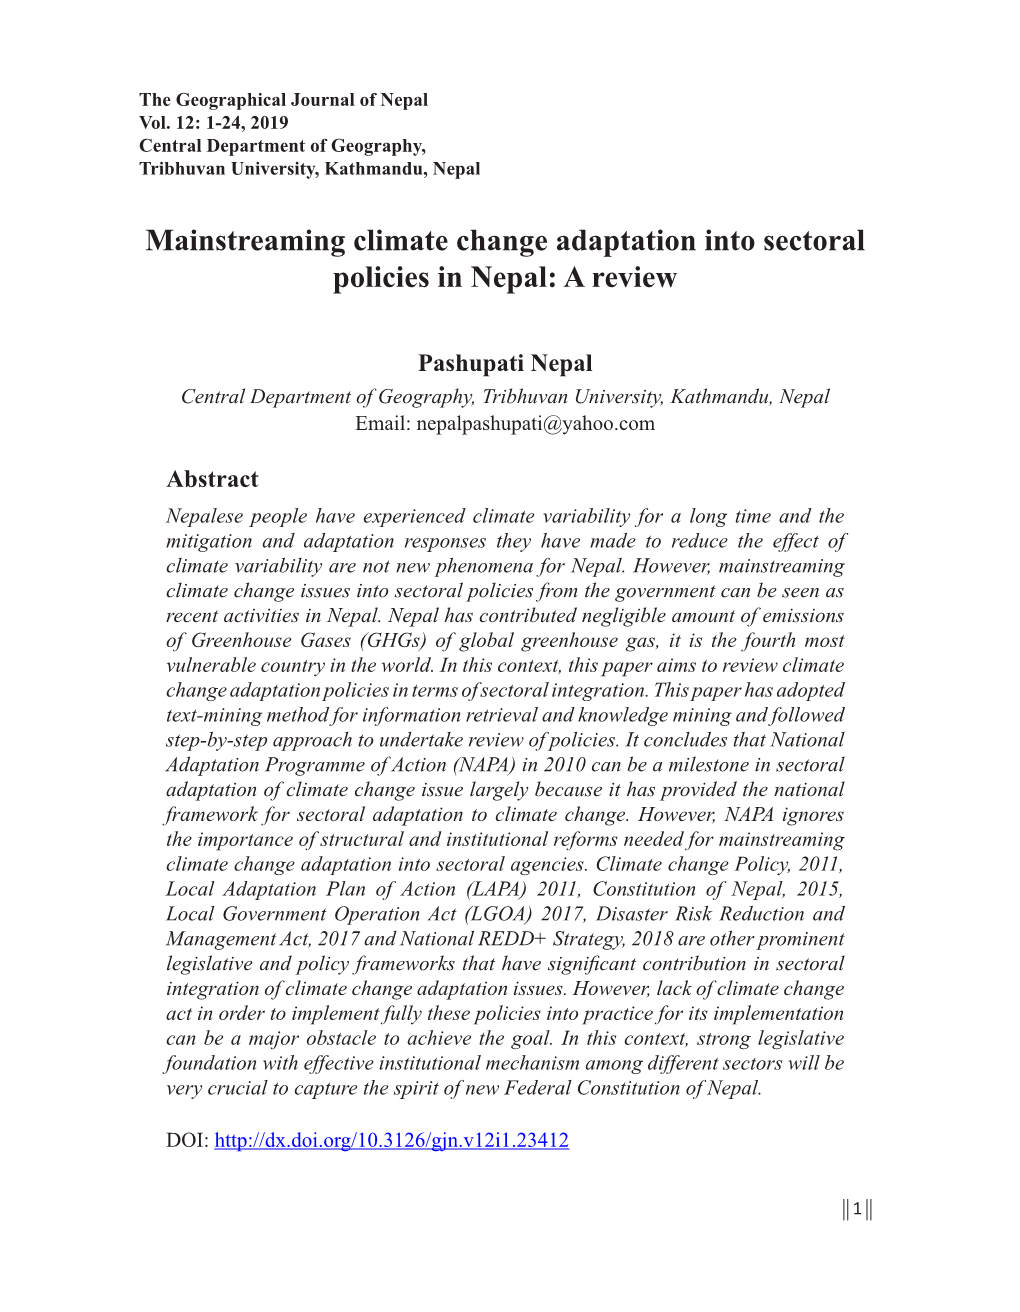 Mainstreaming Climate Change Adaptation Into Sectoral Policies in Nepal: a Review